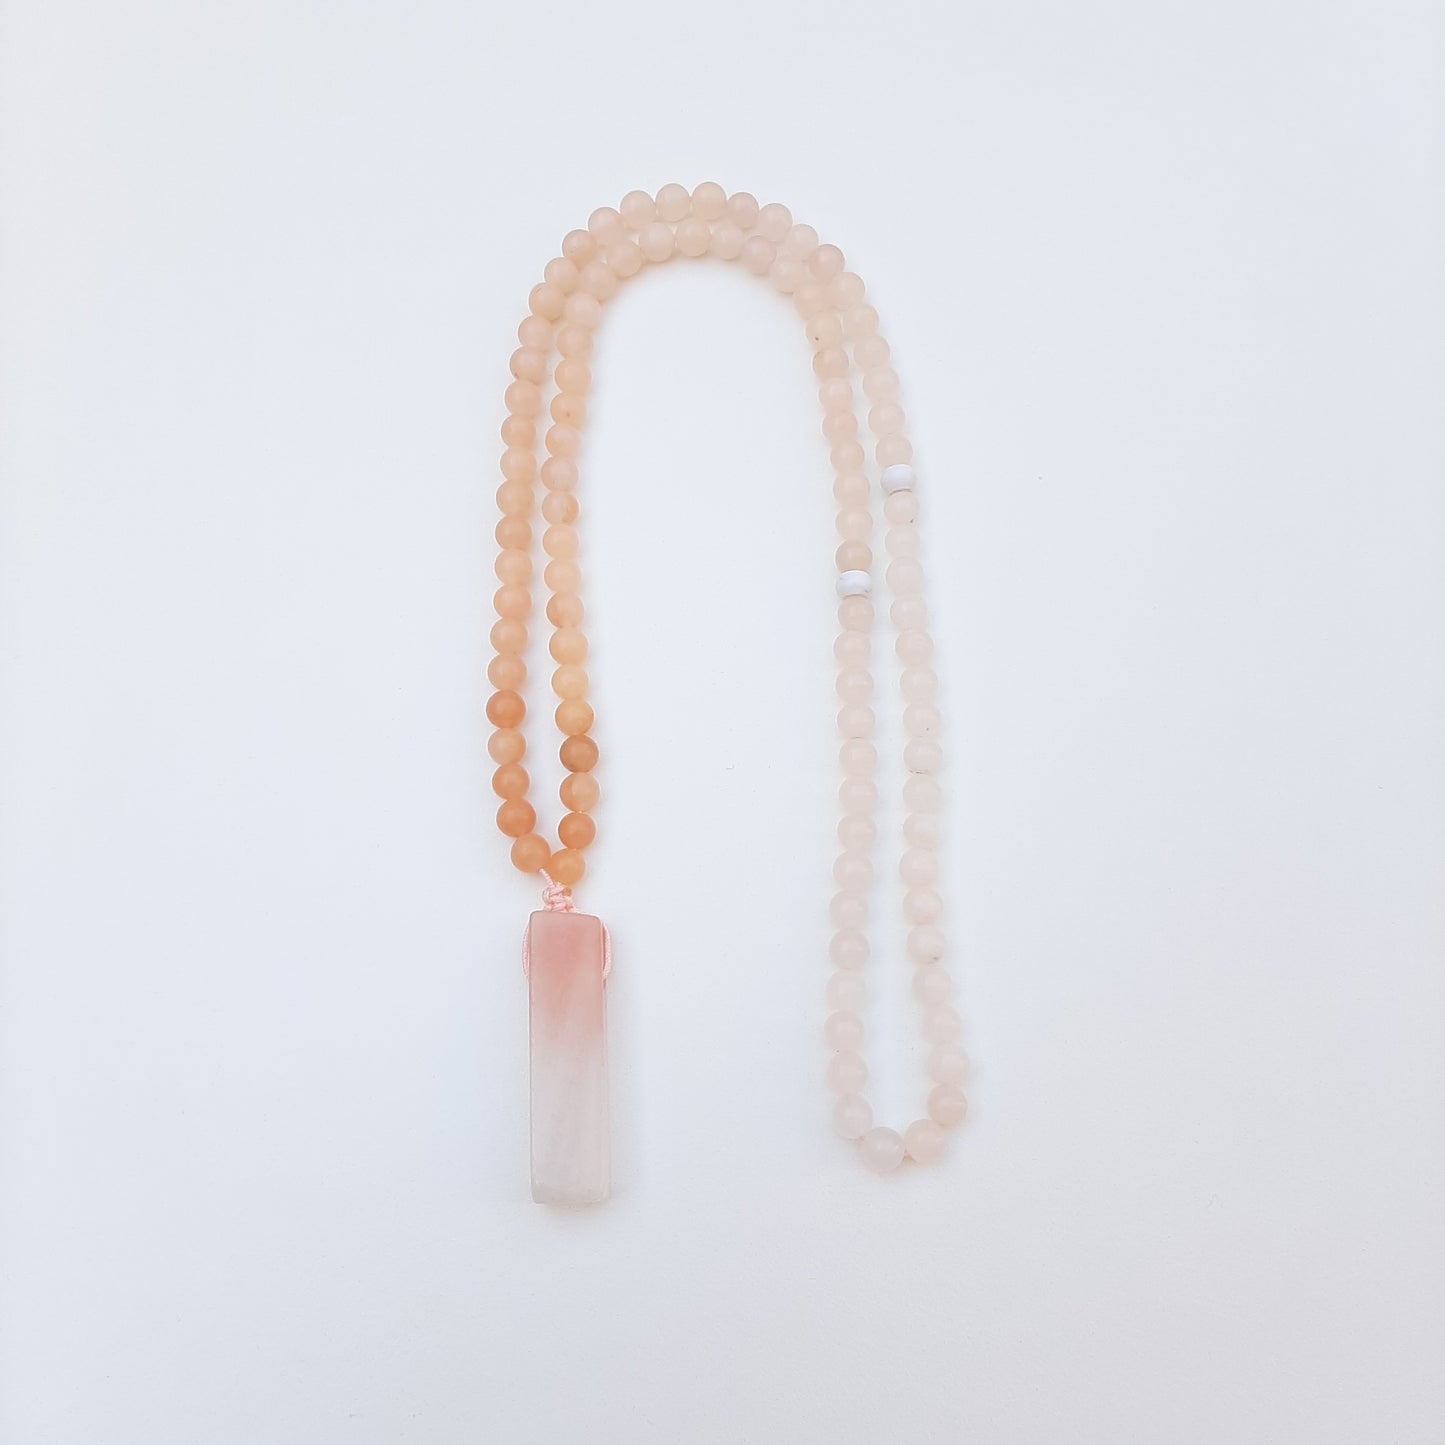 Pink aventurine. Soft and subtle shades of peach and white create a beautiful ombre effect.  Packaged in a luxurious pouch and a gift box.  99 beads